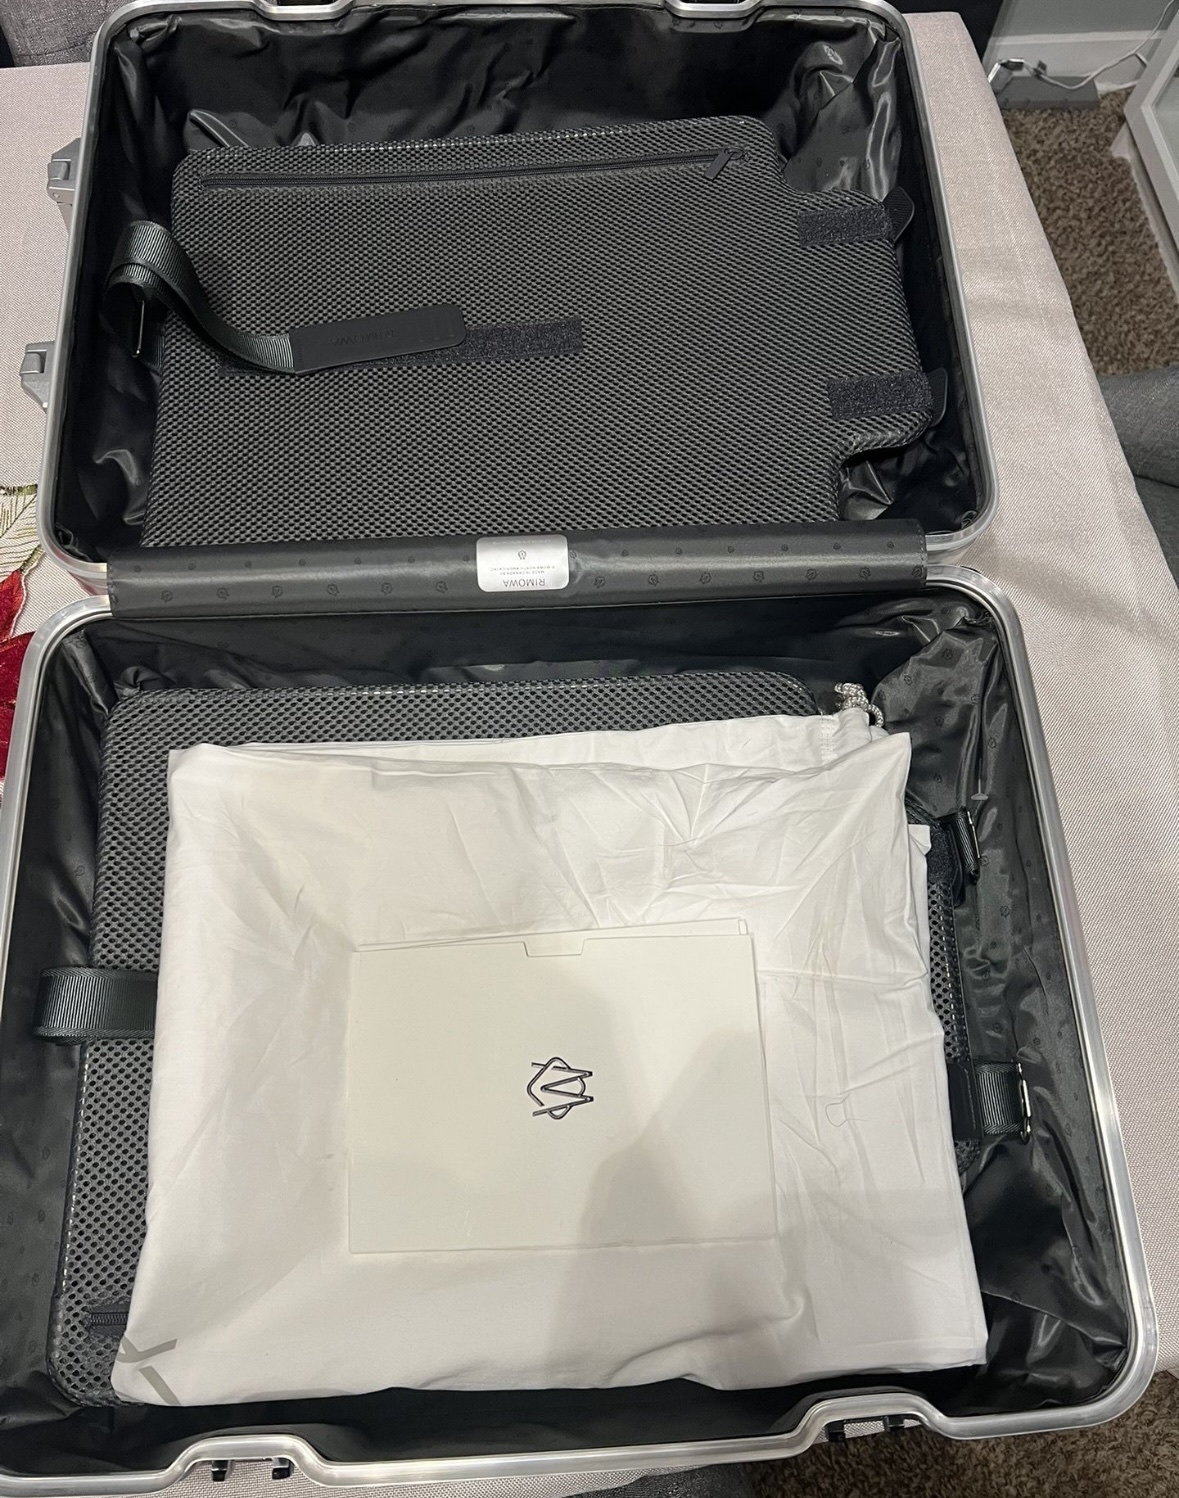 Is Rimowa as bad as people say? - FlyerTalk Forums